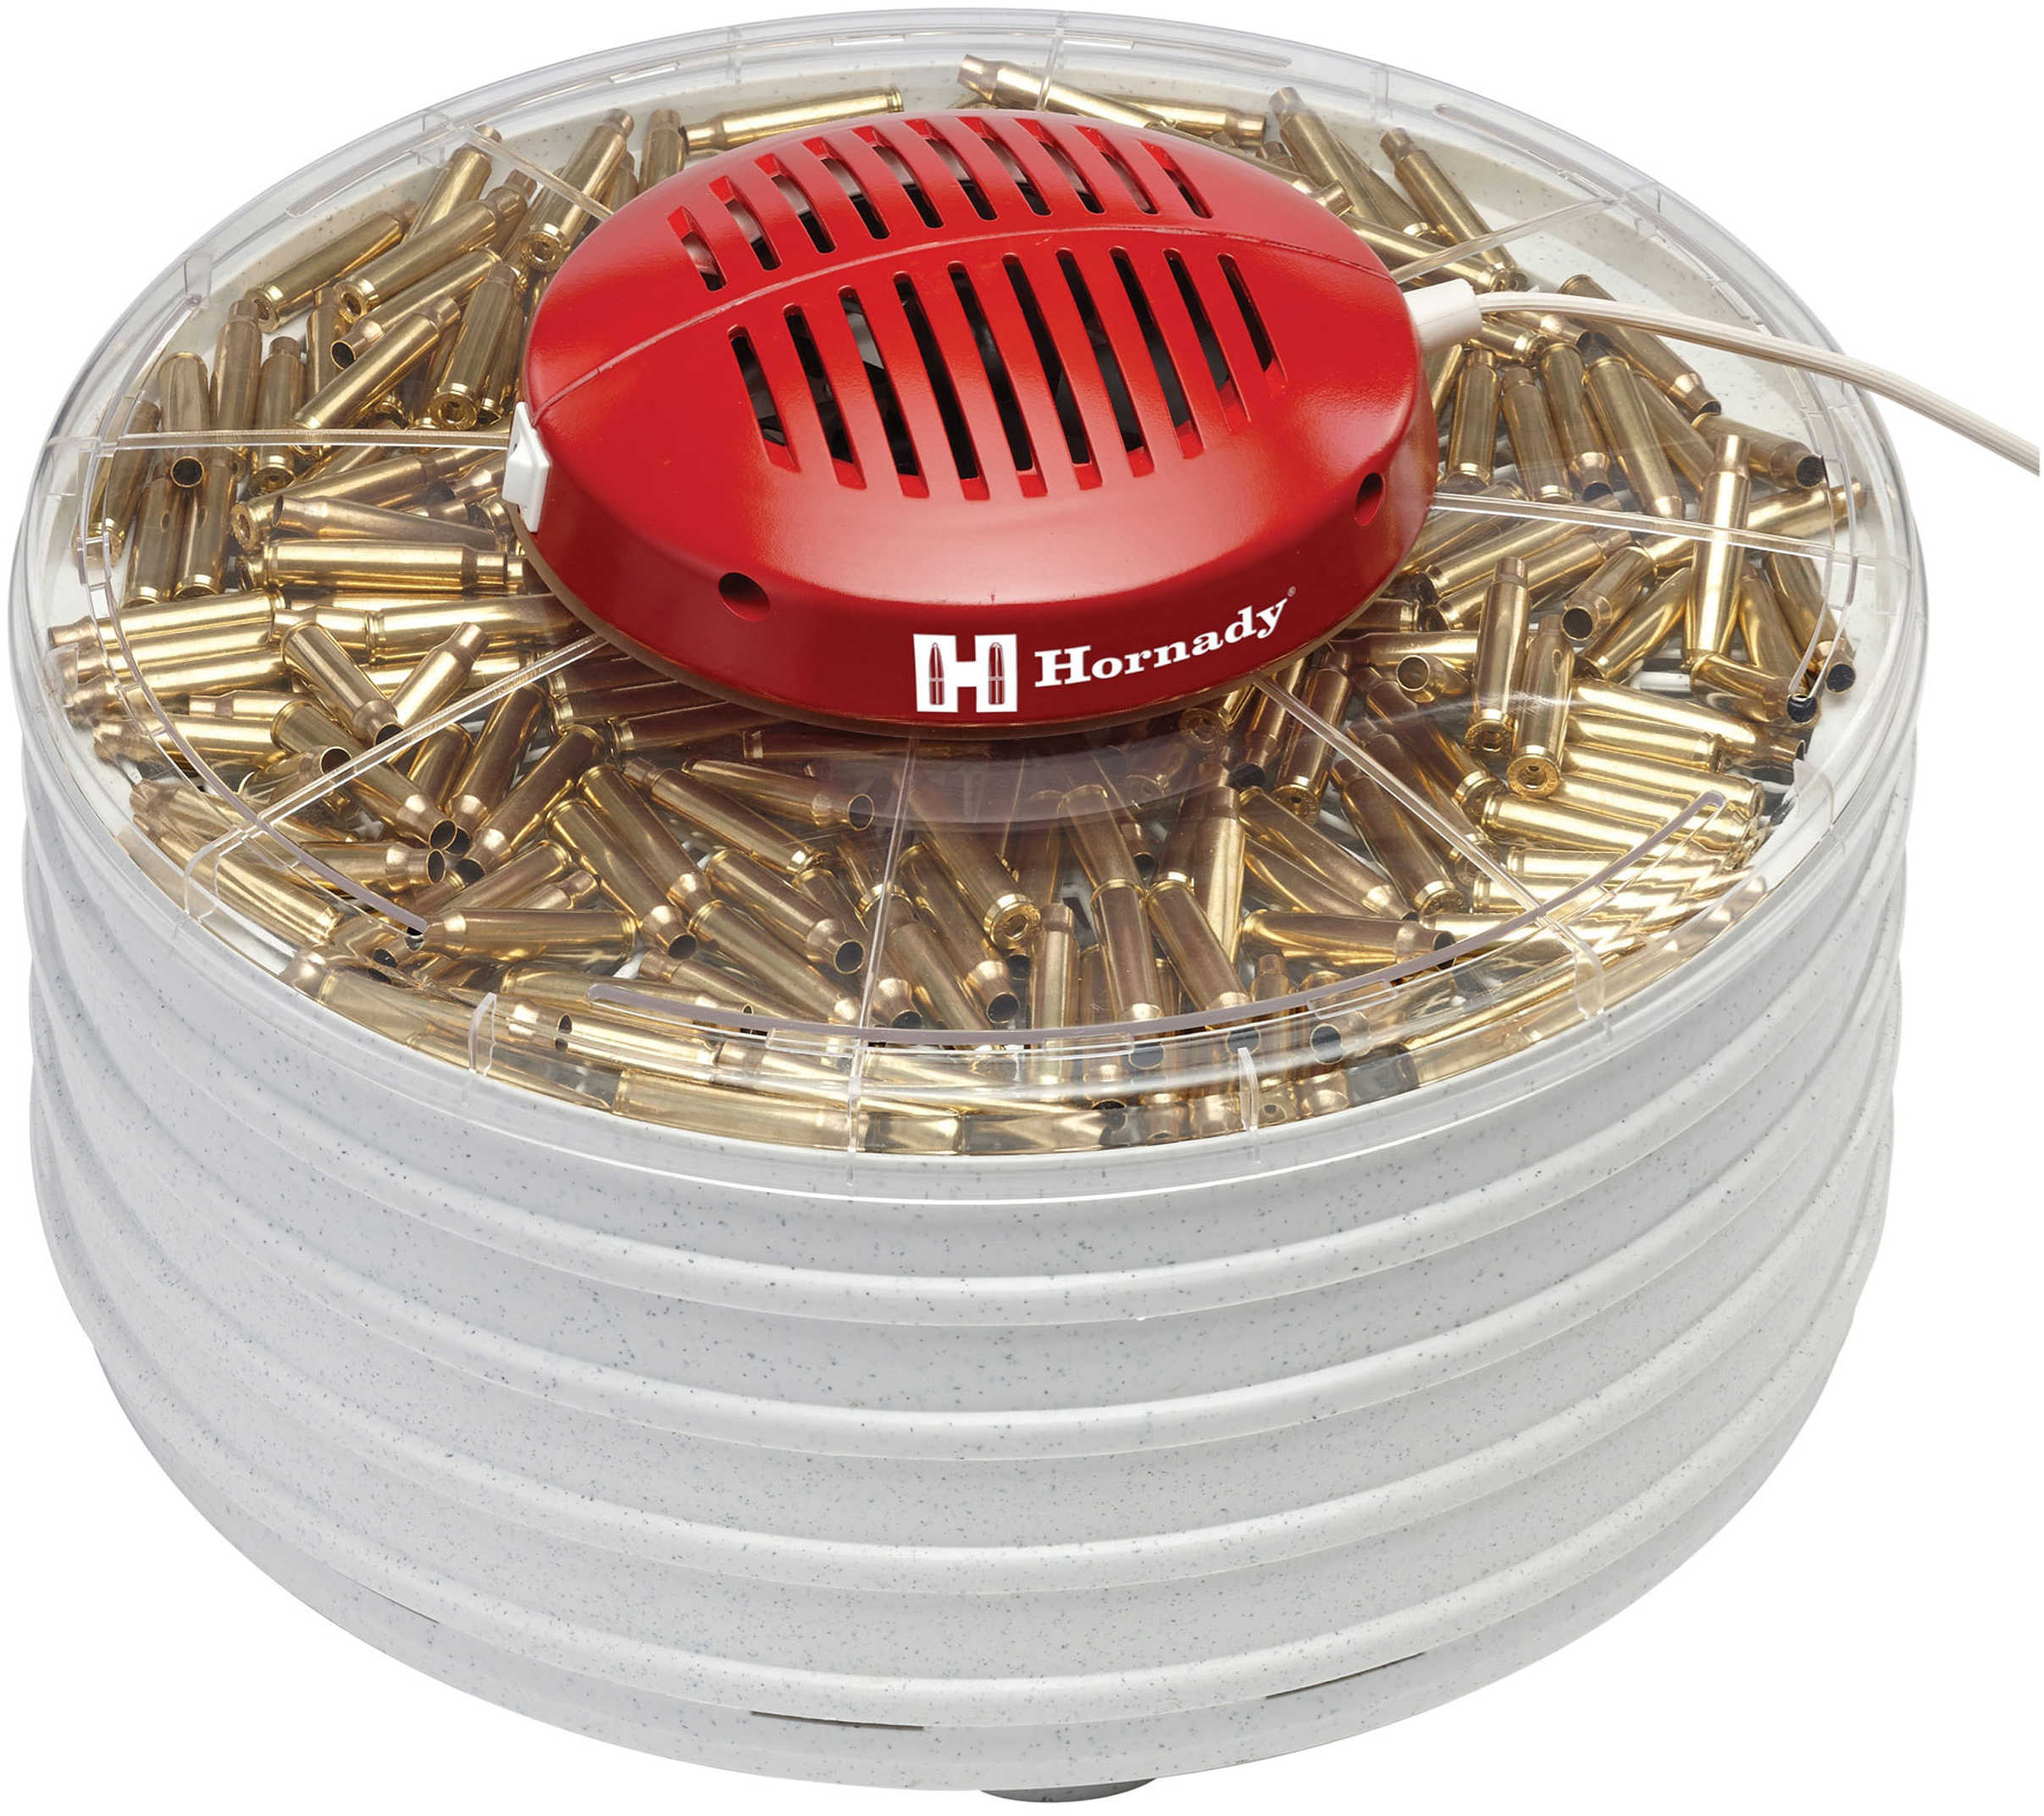 Hornady Case and Parts Dryer Md: 053310